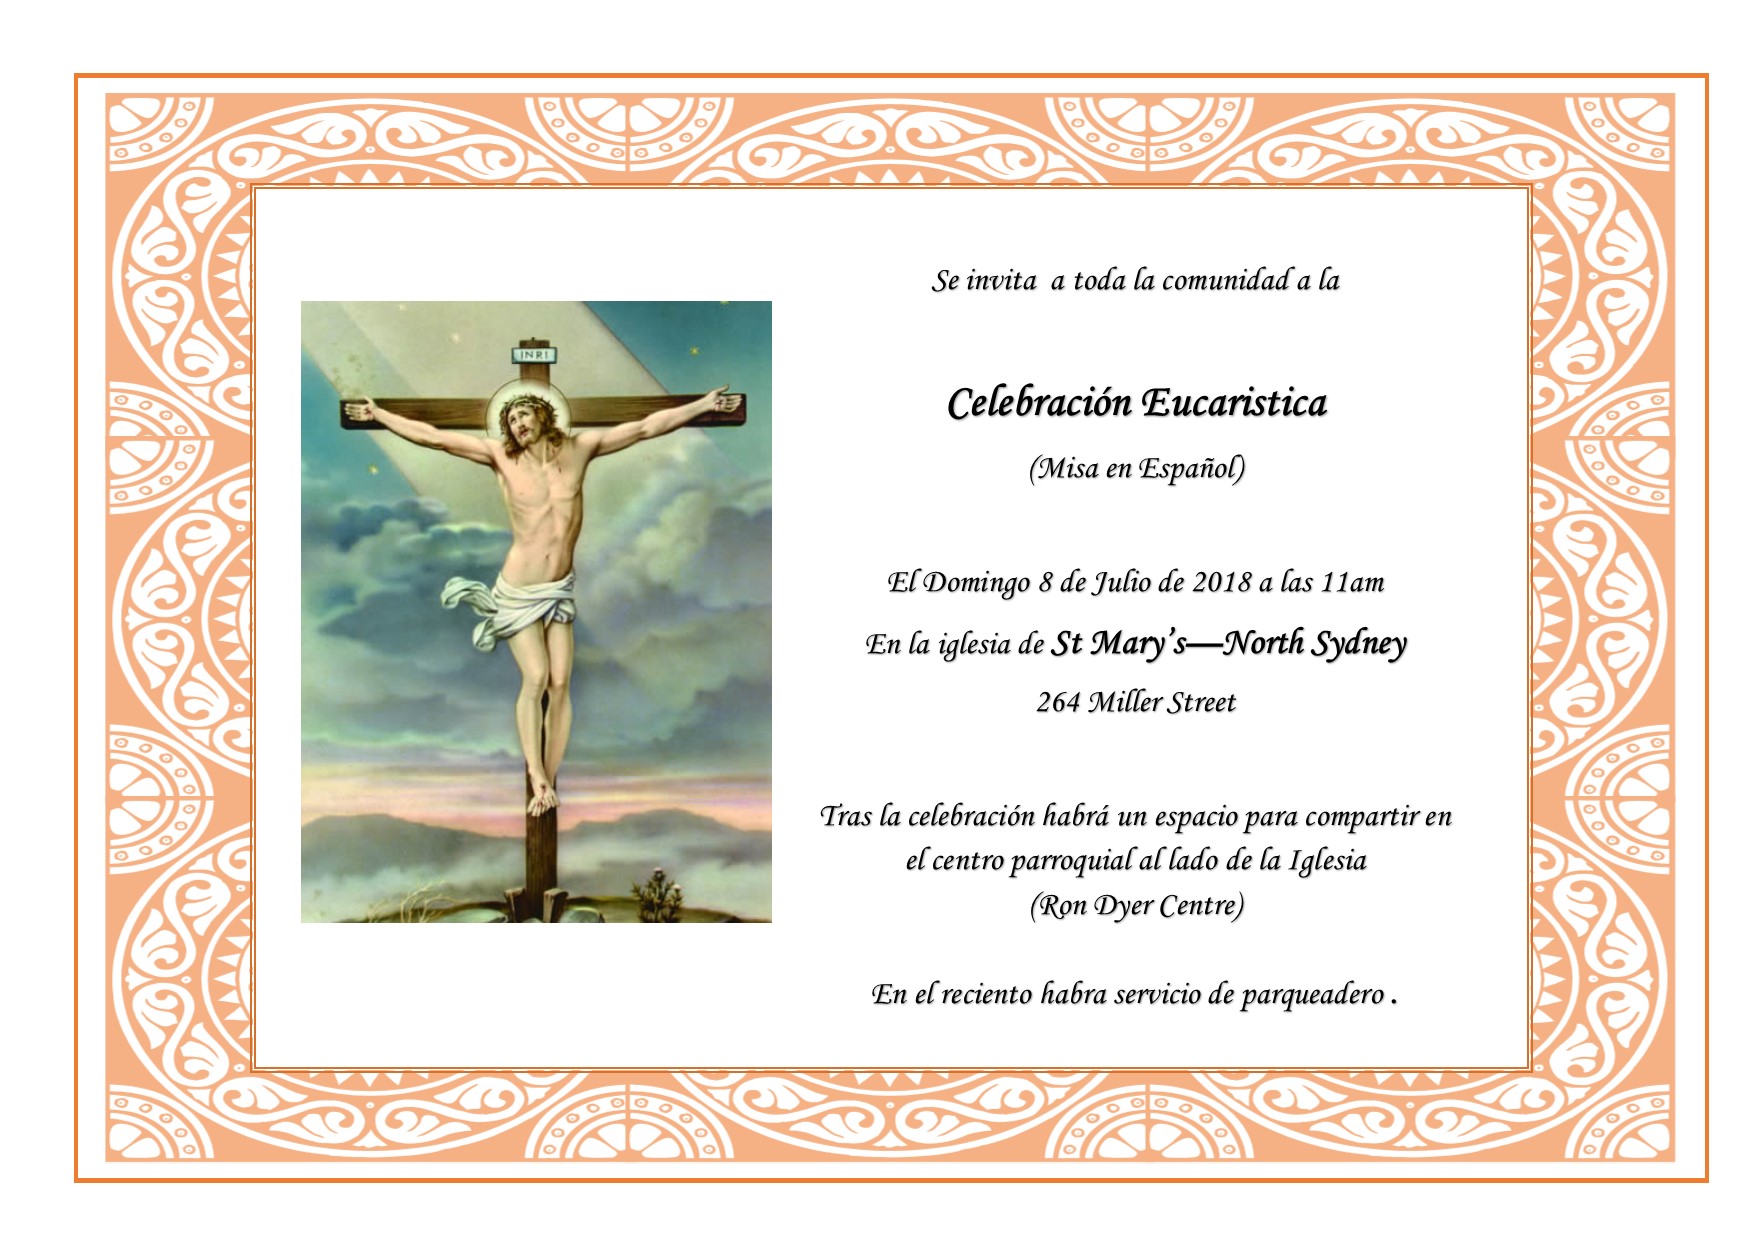 <img src="https://spanishcare.org.au/wp-content/plugins/my-calendar/images/icons/ball.png" alt="Category: Social" class="category-icon" style="background:#FFCCFF" /> Celebracion Eucaristica